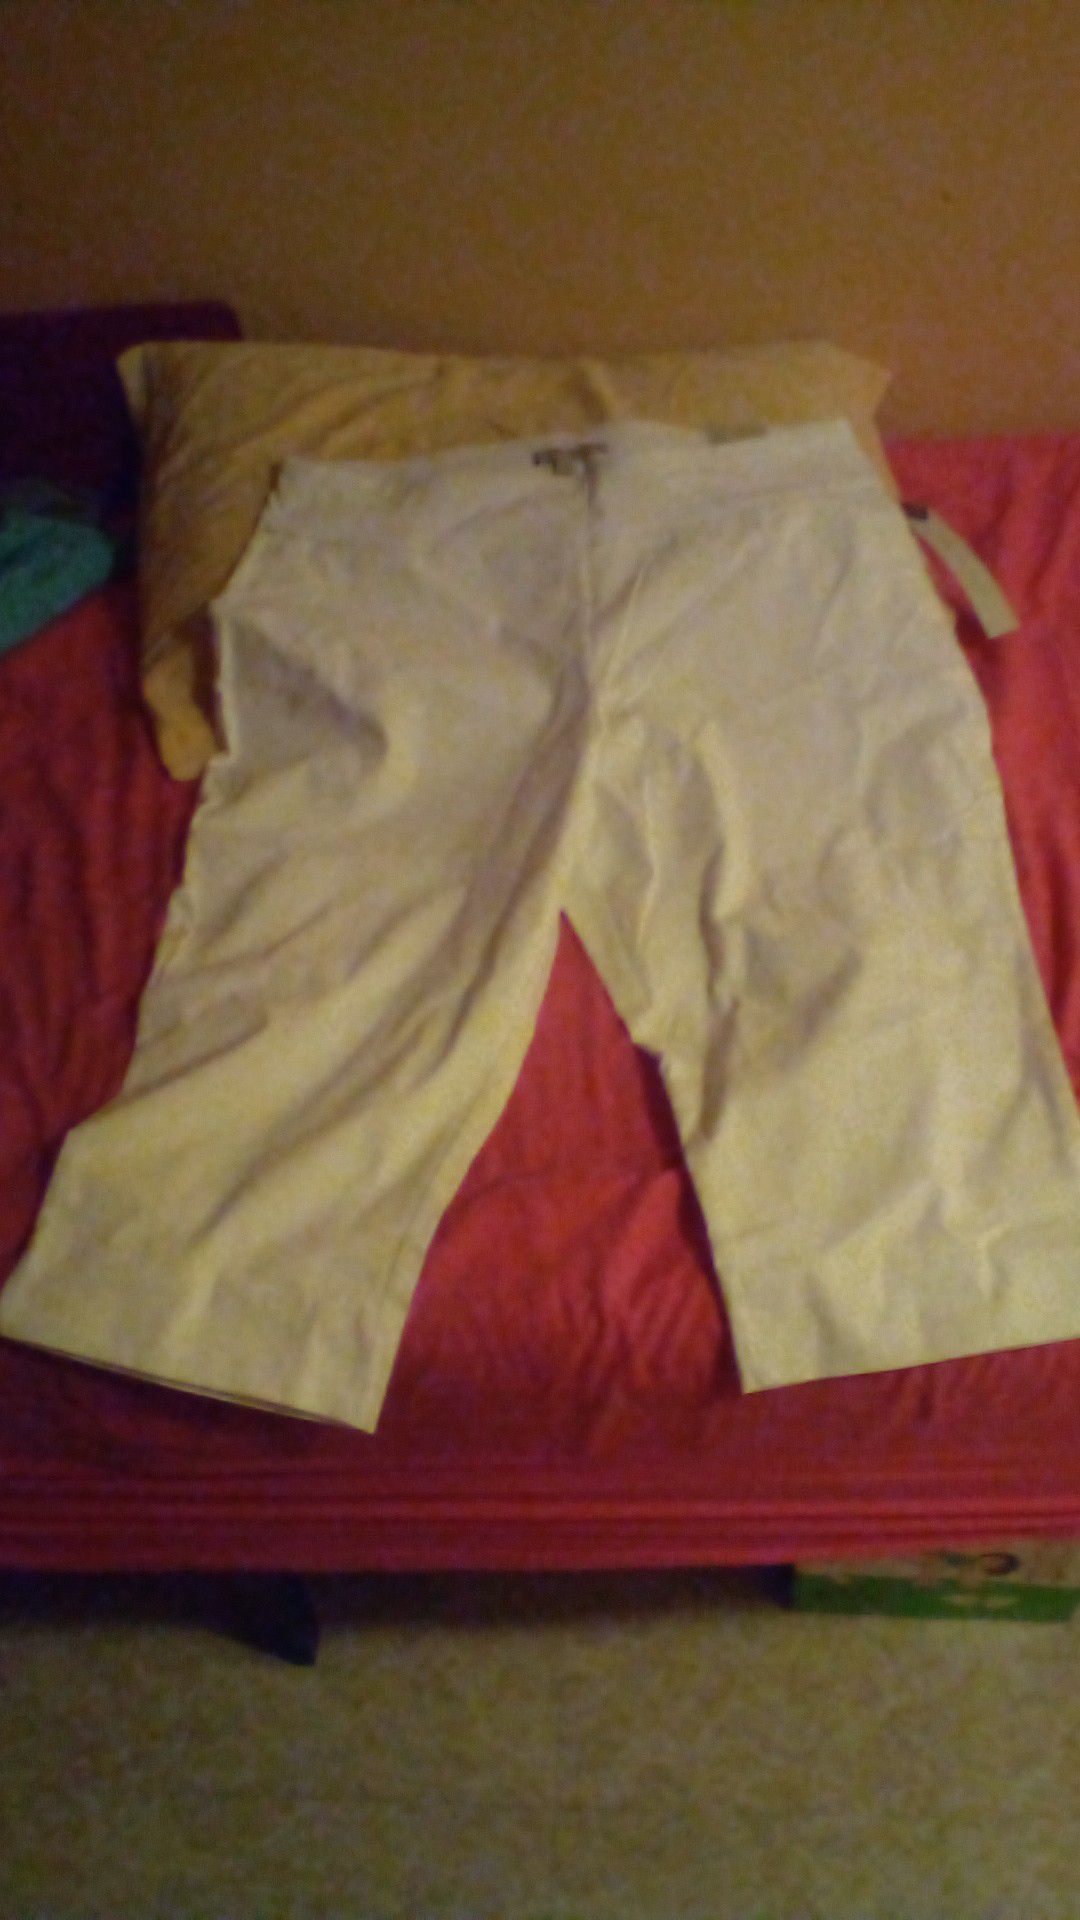 Designer Larry Lavine Midpants size 20 with tag marked 69.00 and will take half price or best offer